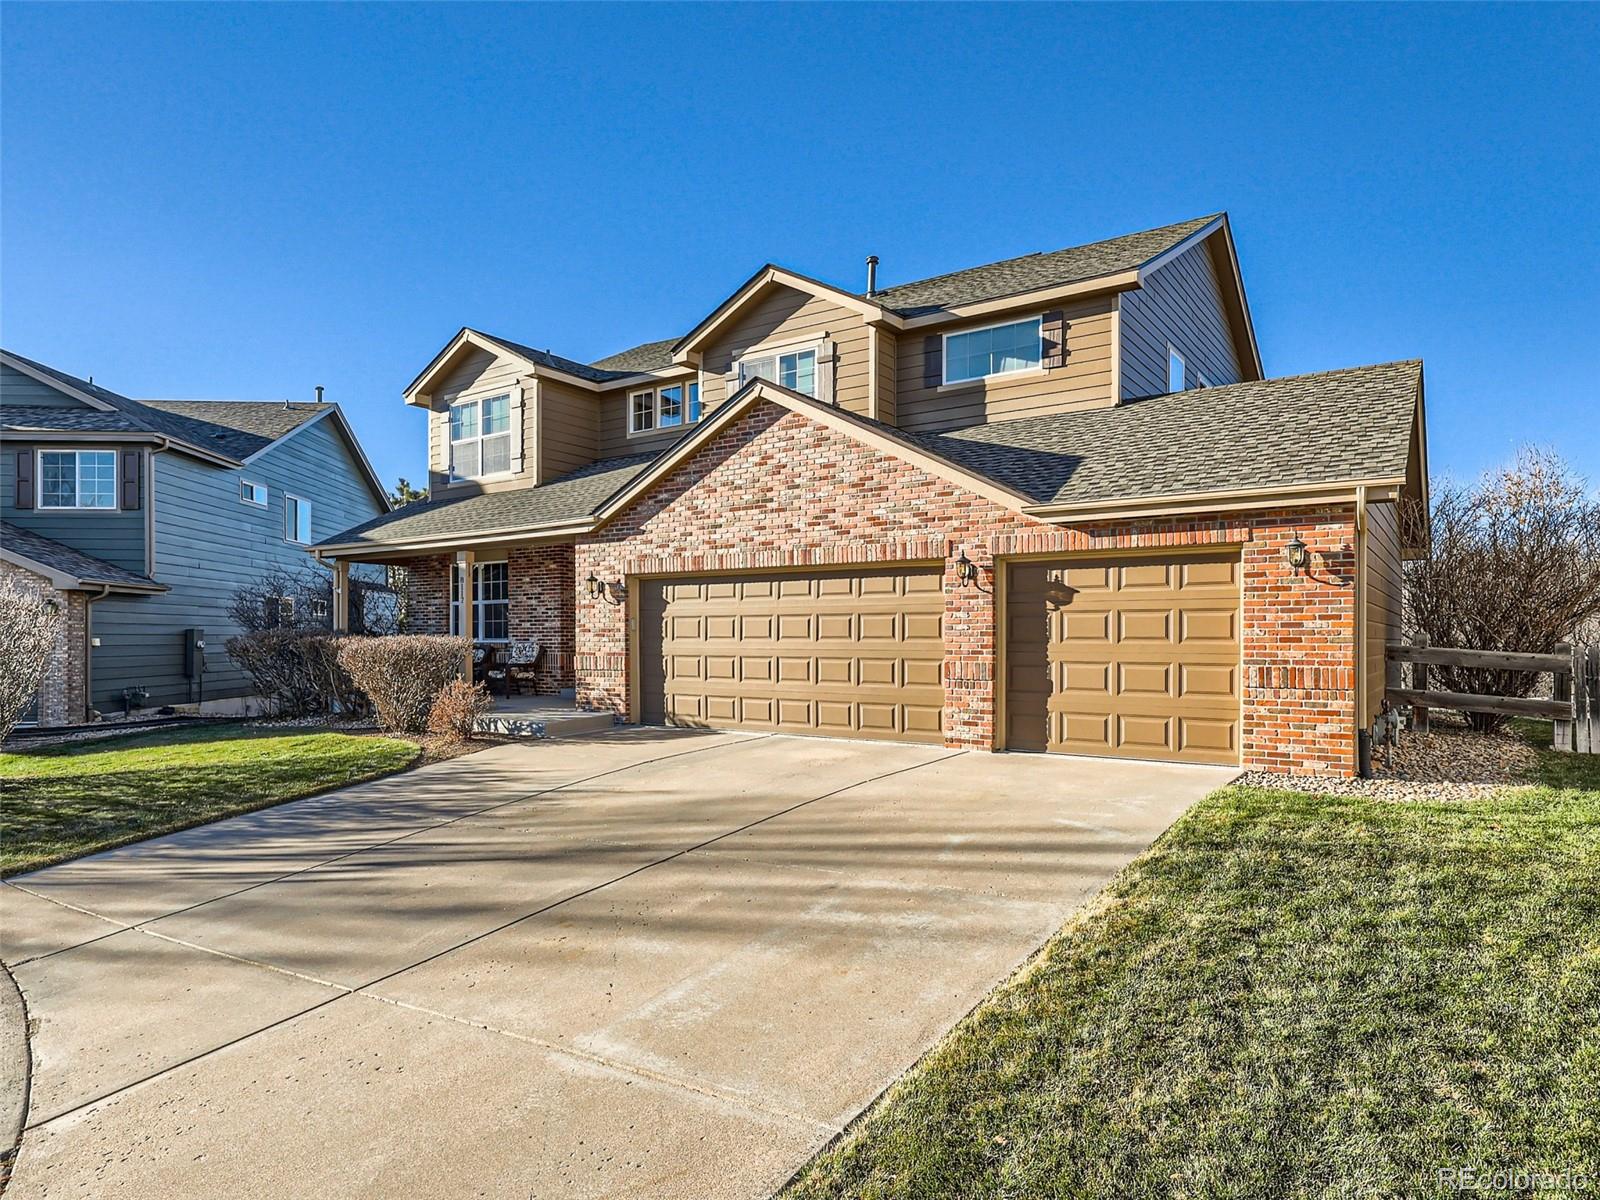 8117  oak briar way, Pine sold home. Closed on 2024-03-20 for $878,850.